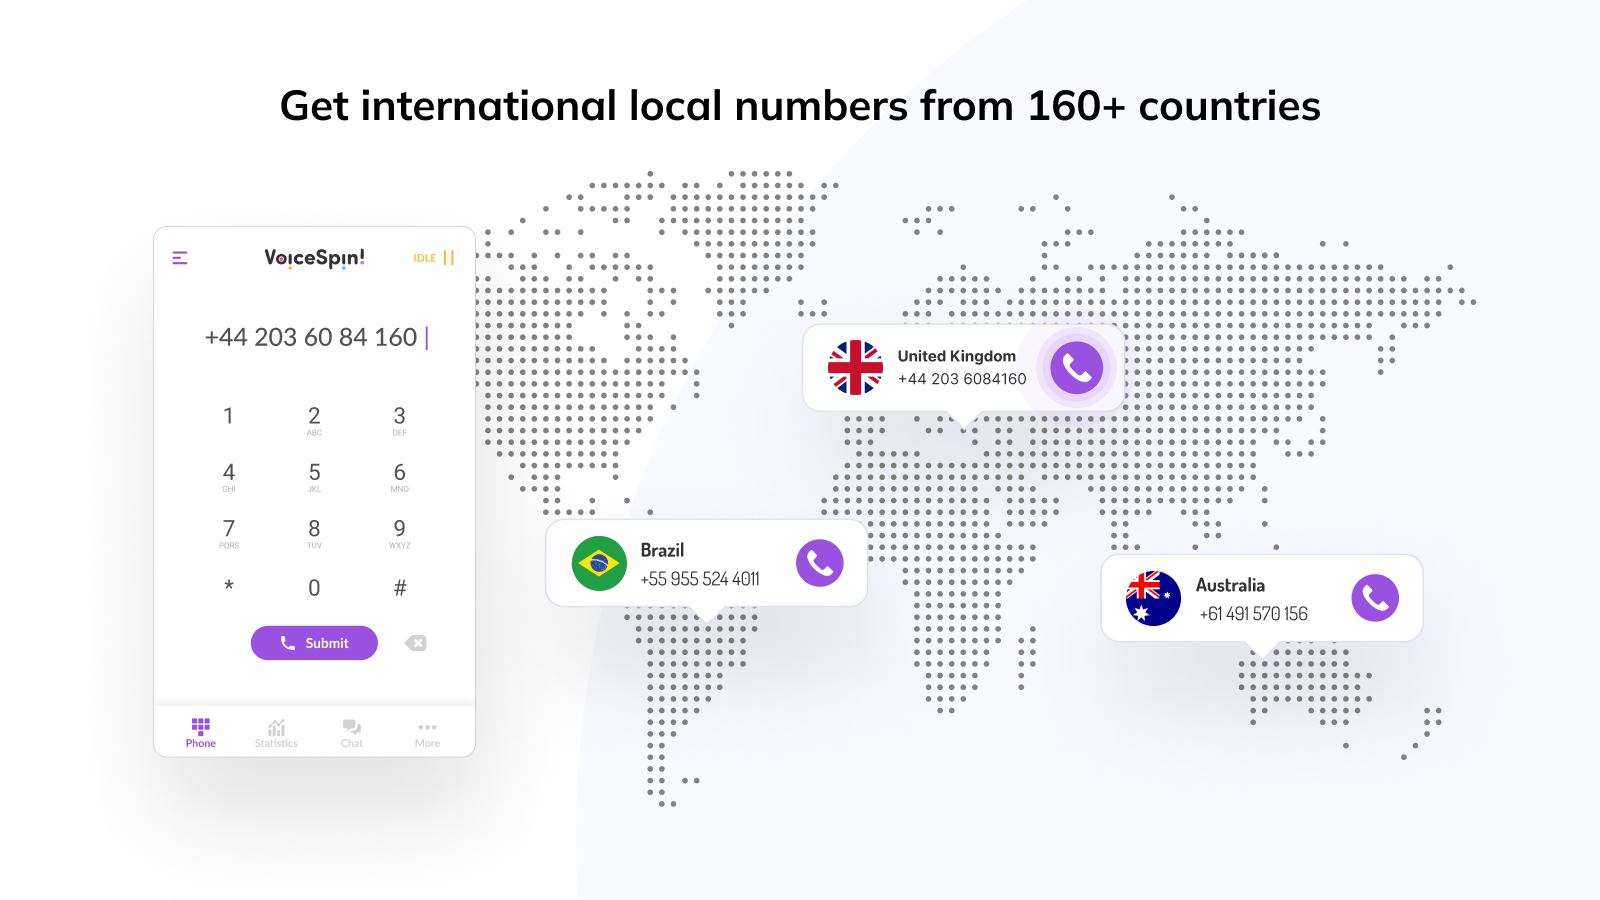 Get international local numbers from 160+ countries